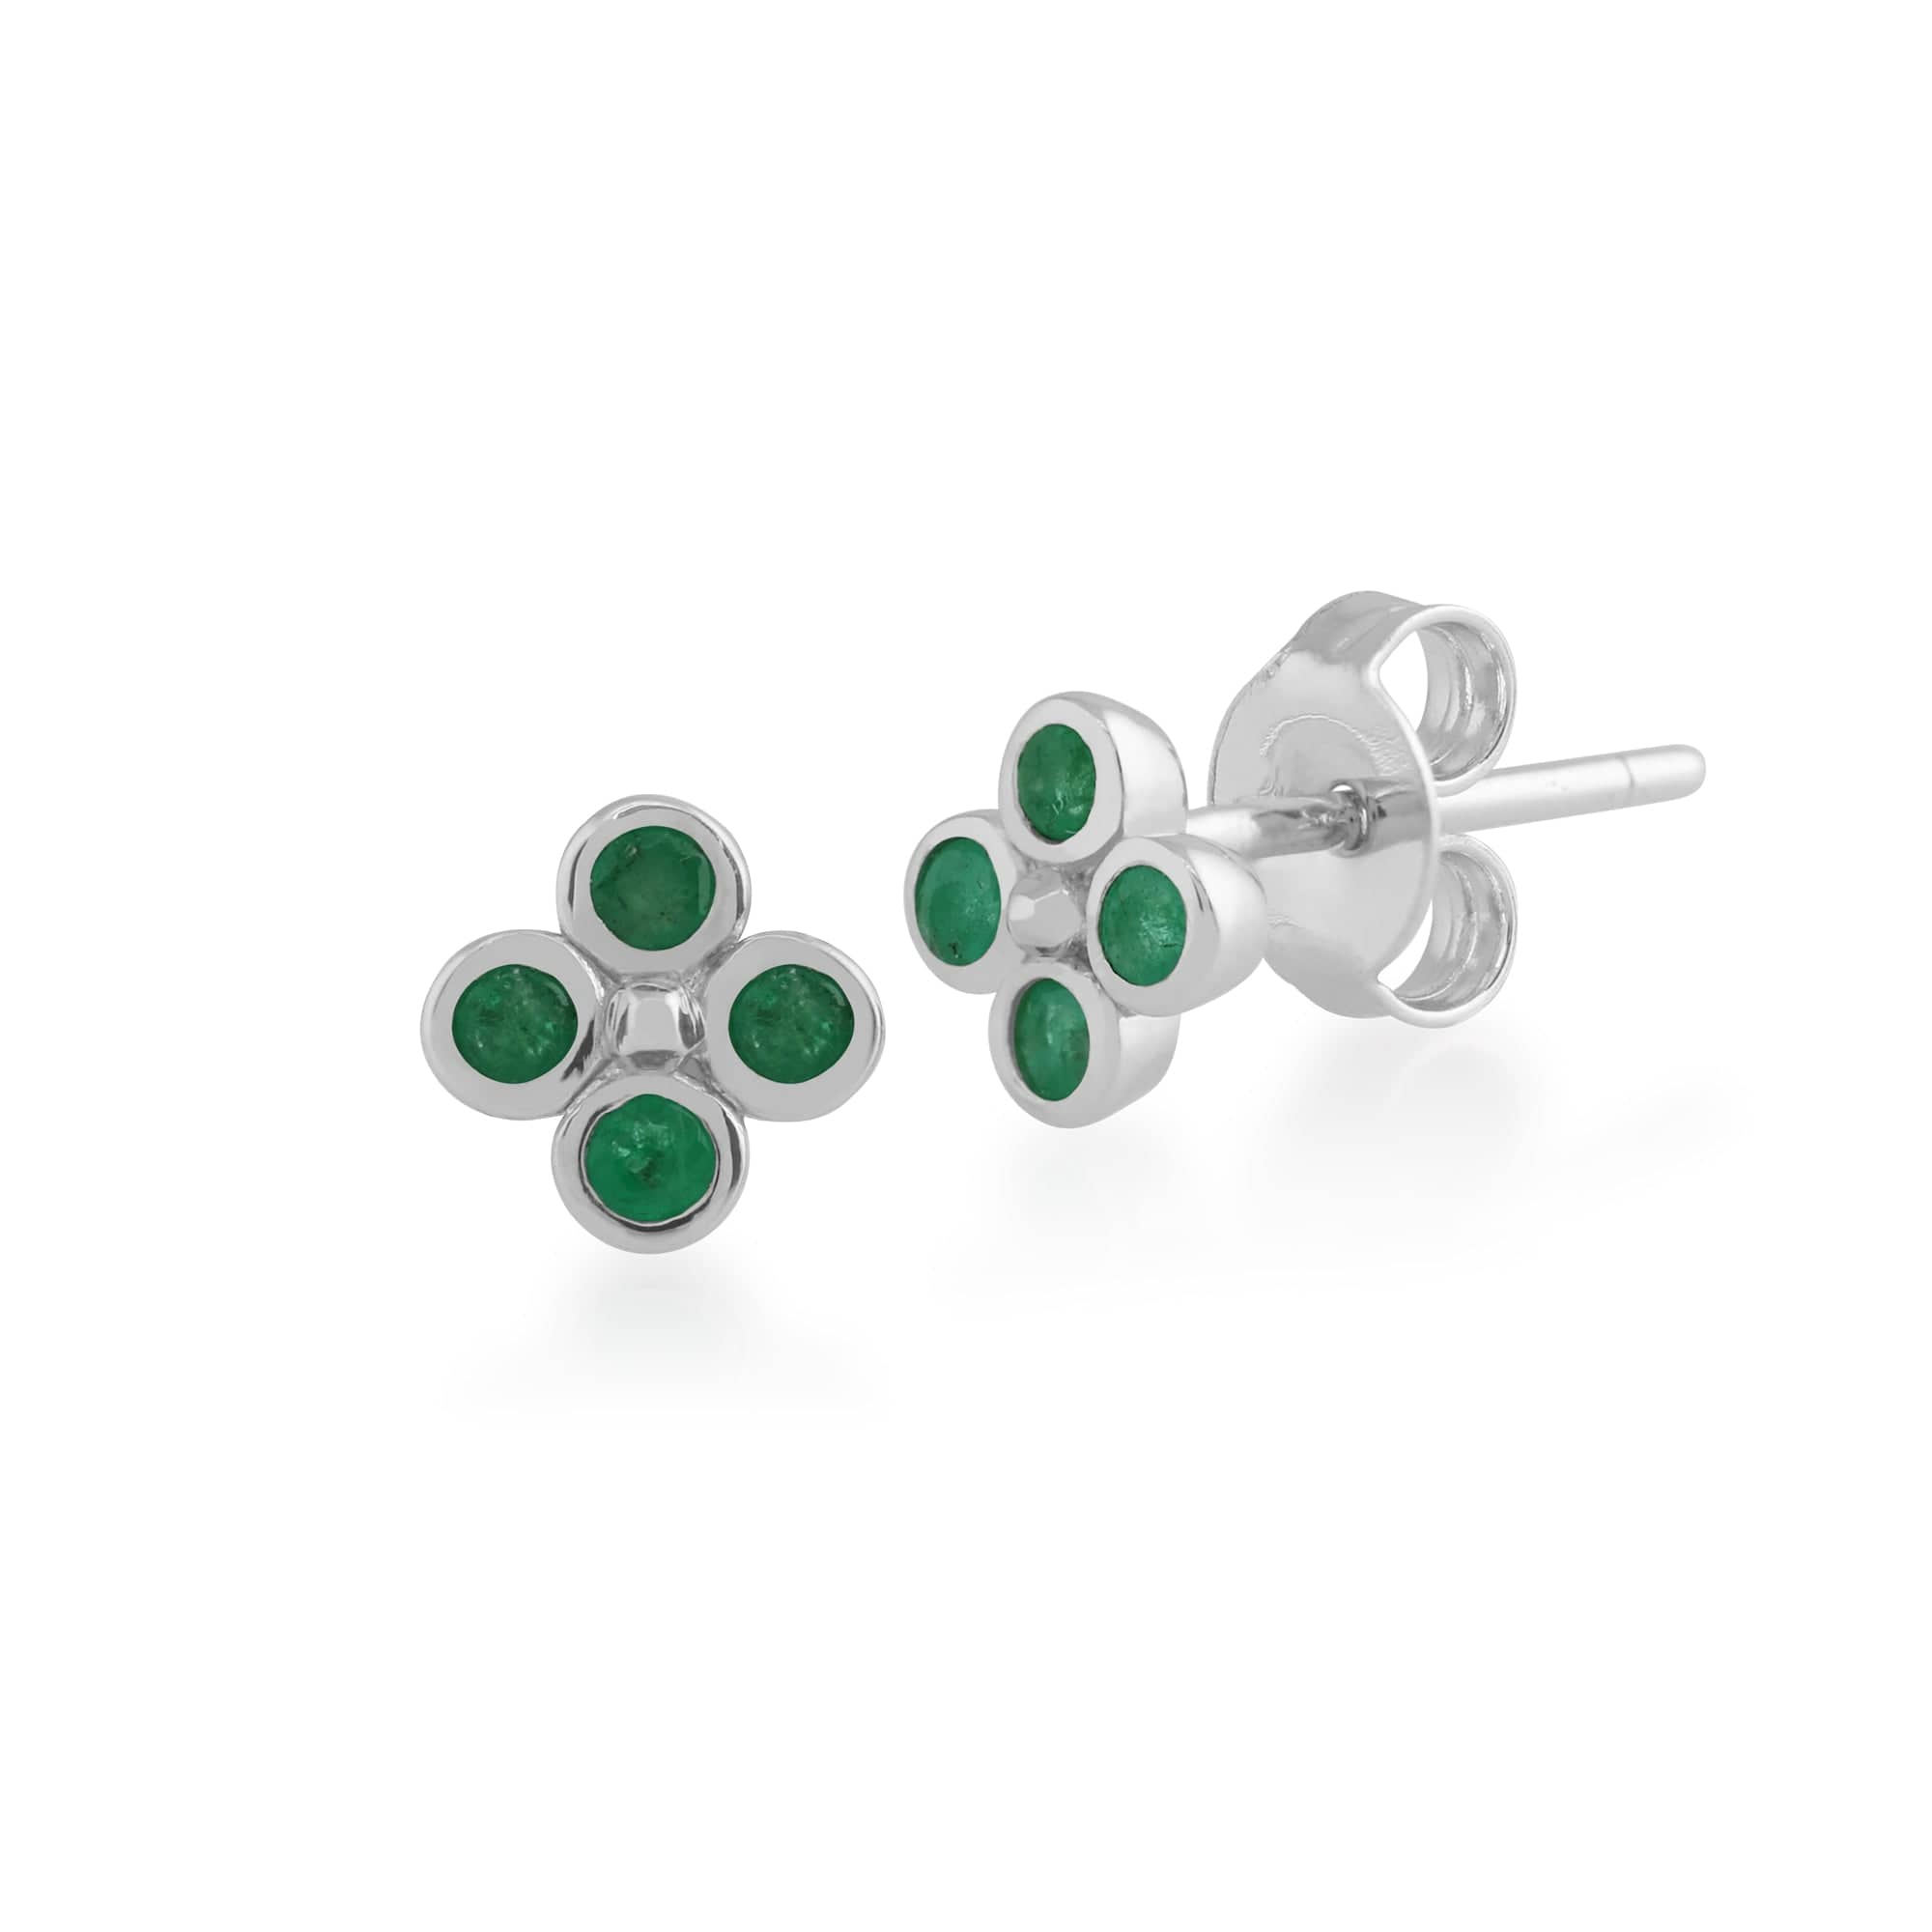 Floral Round Emerald Clover Stud Earrings & Ring Set in 925 Sterling Silver - Gemondo